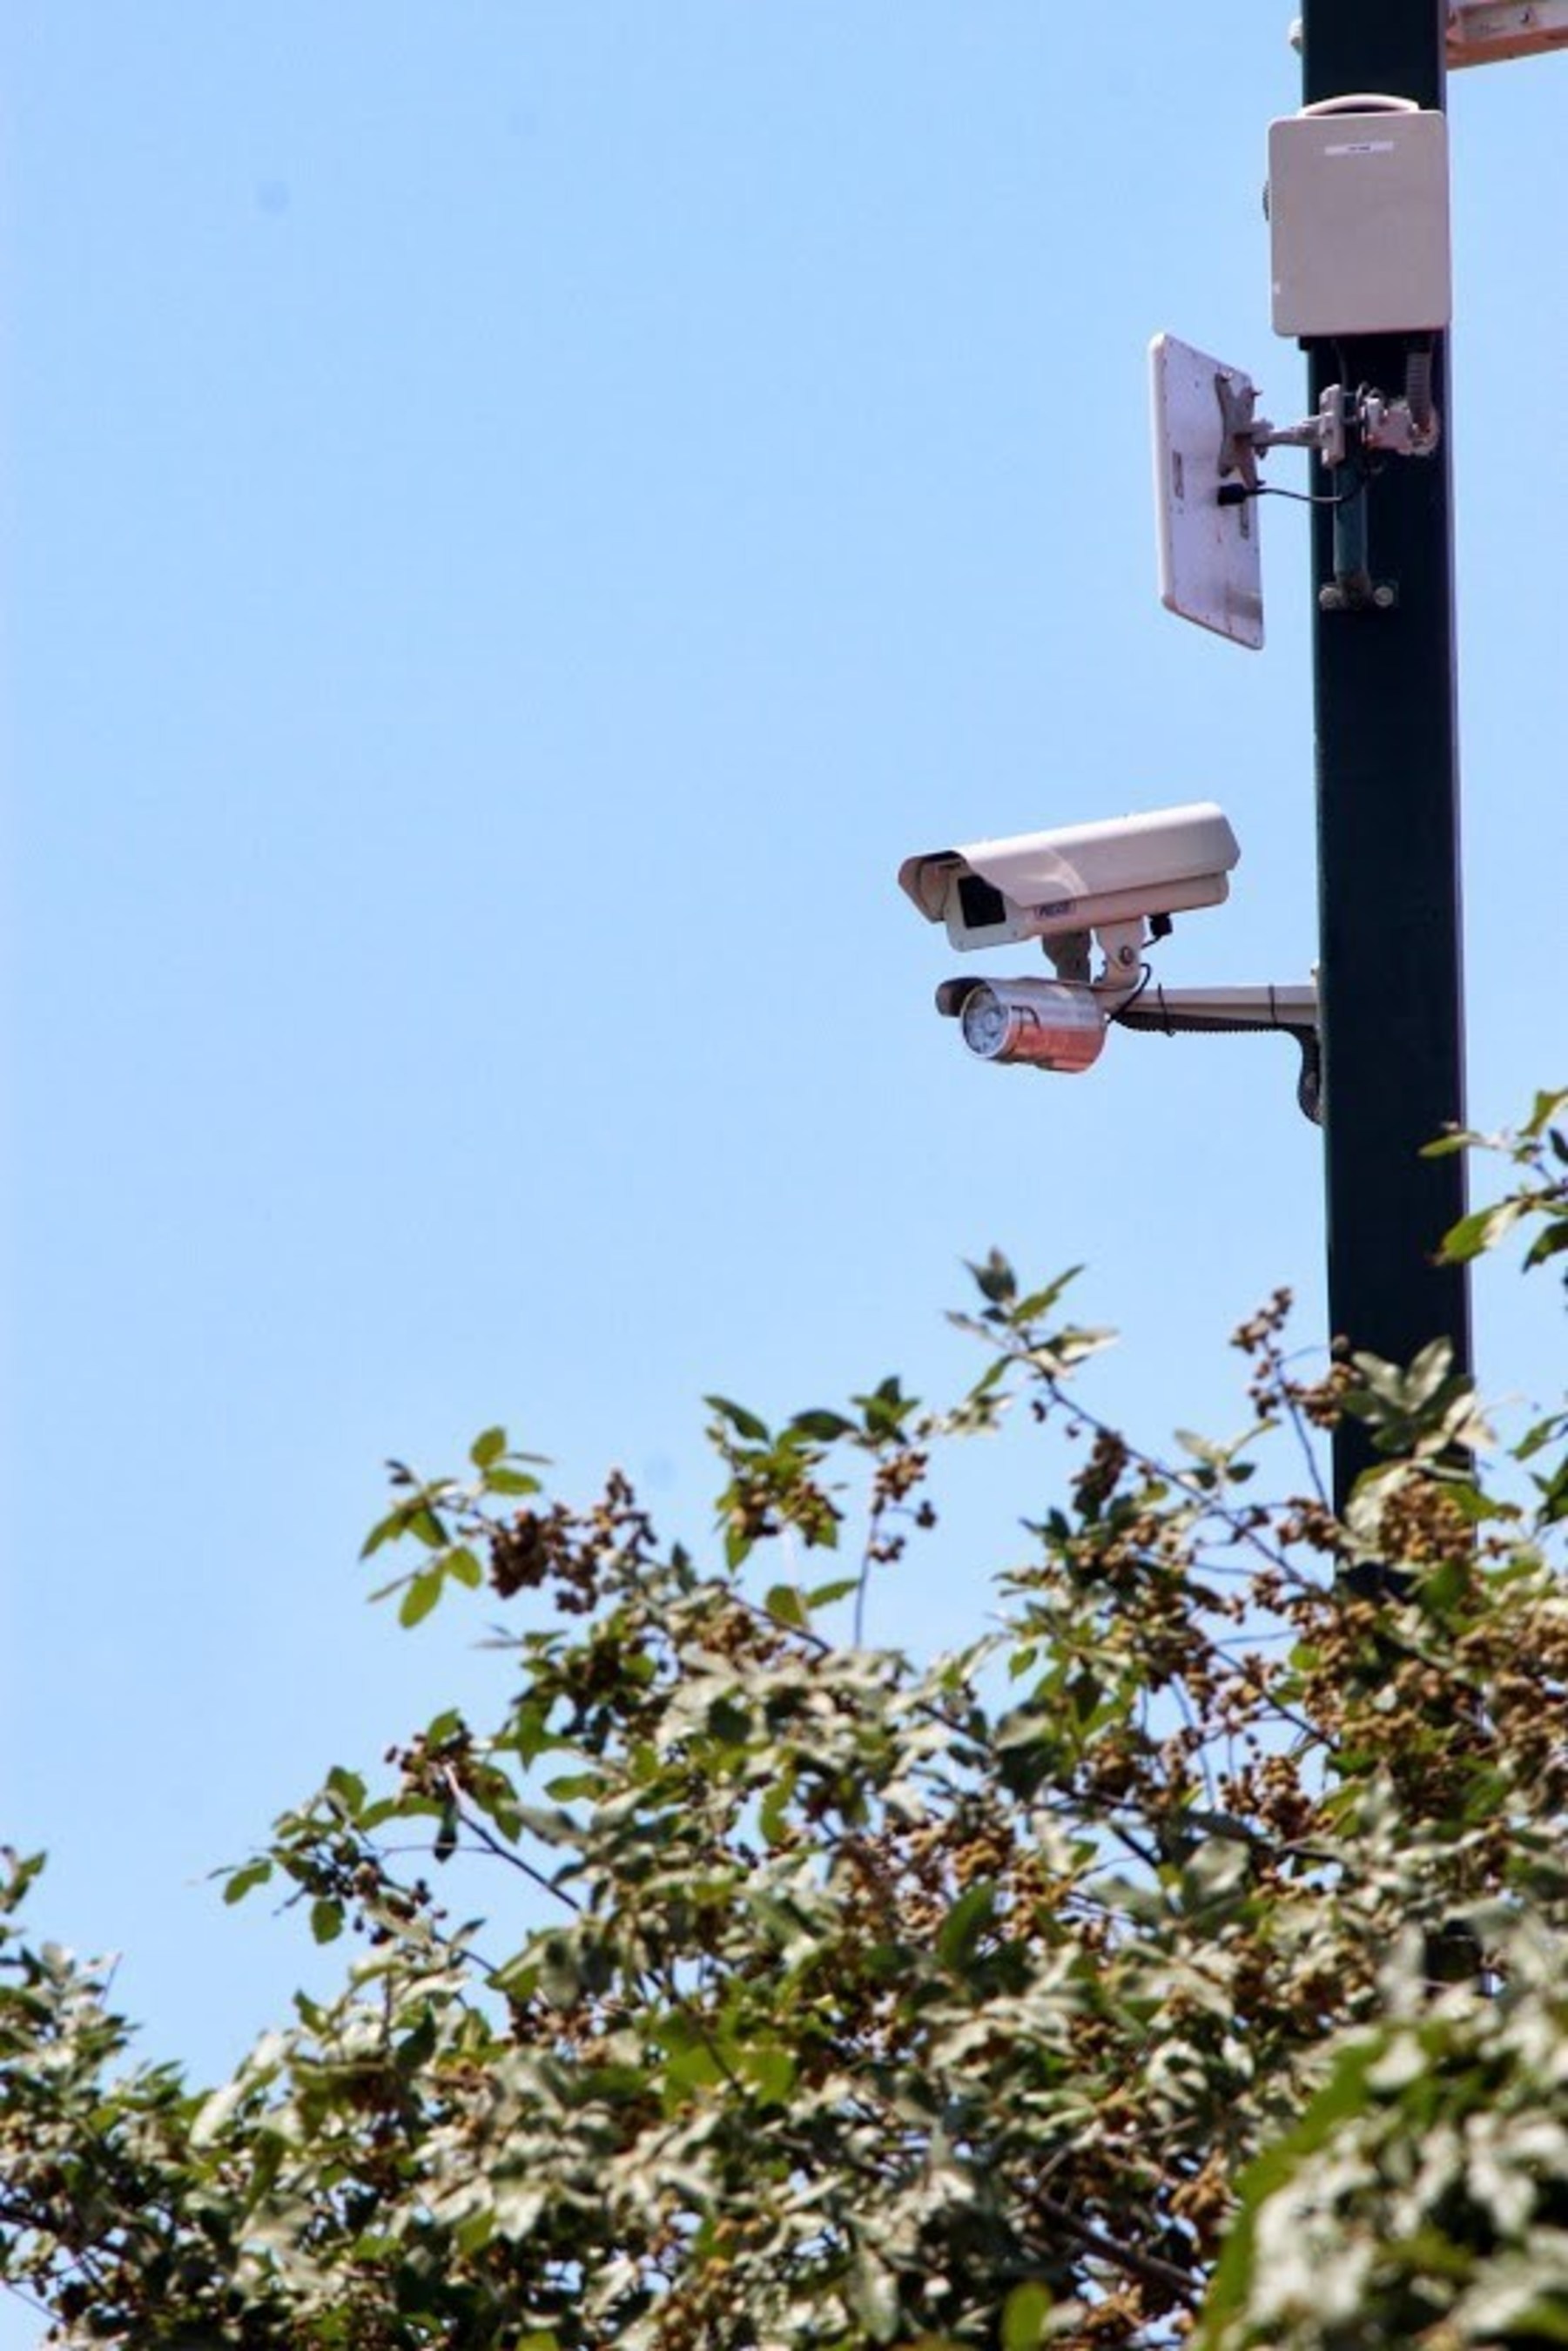 RADWIN PtP transmit high-quality video from public areas to police headquarters